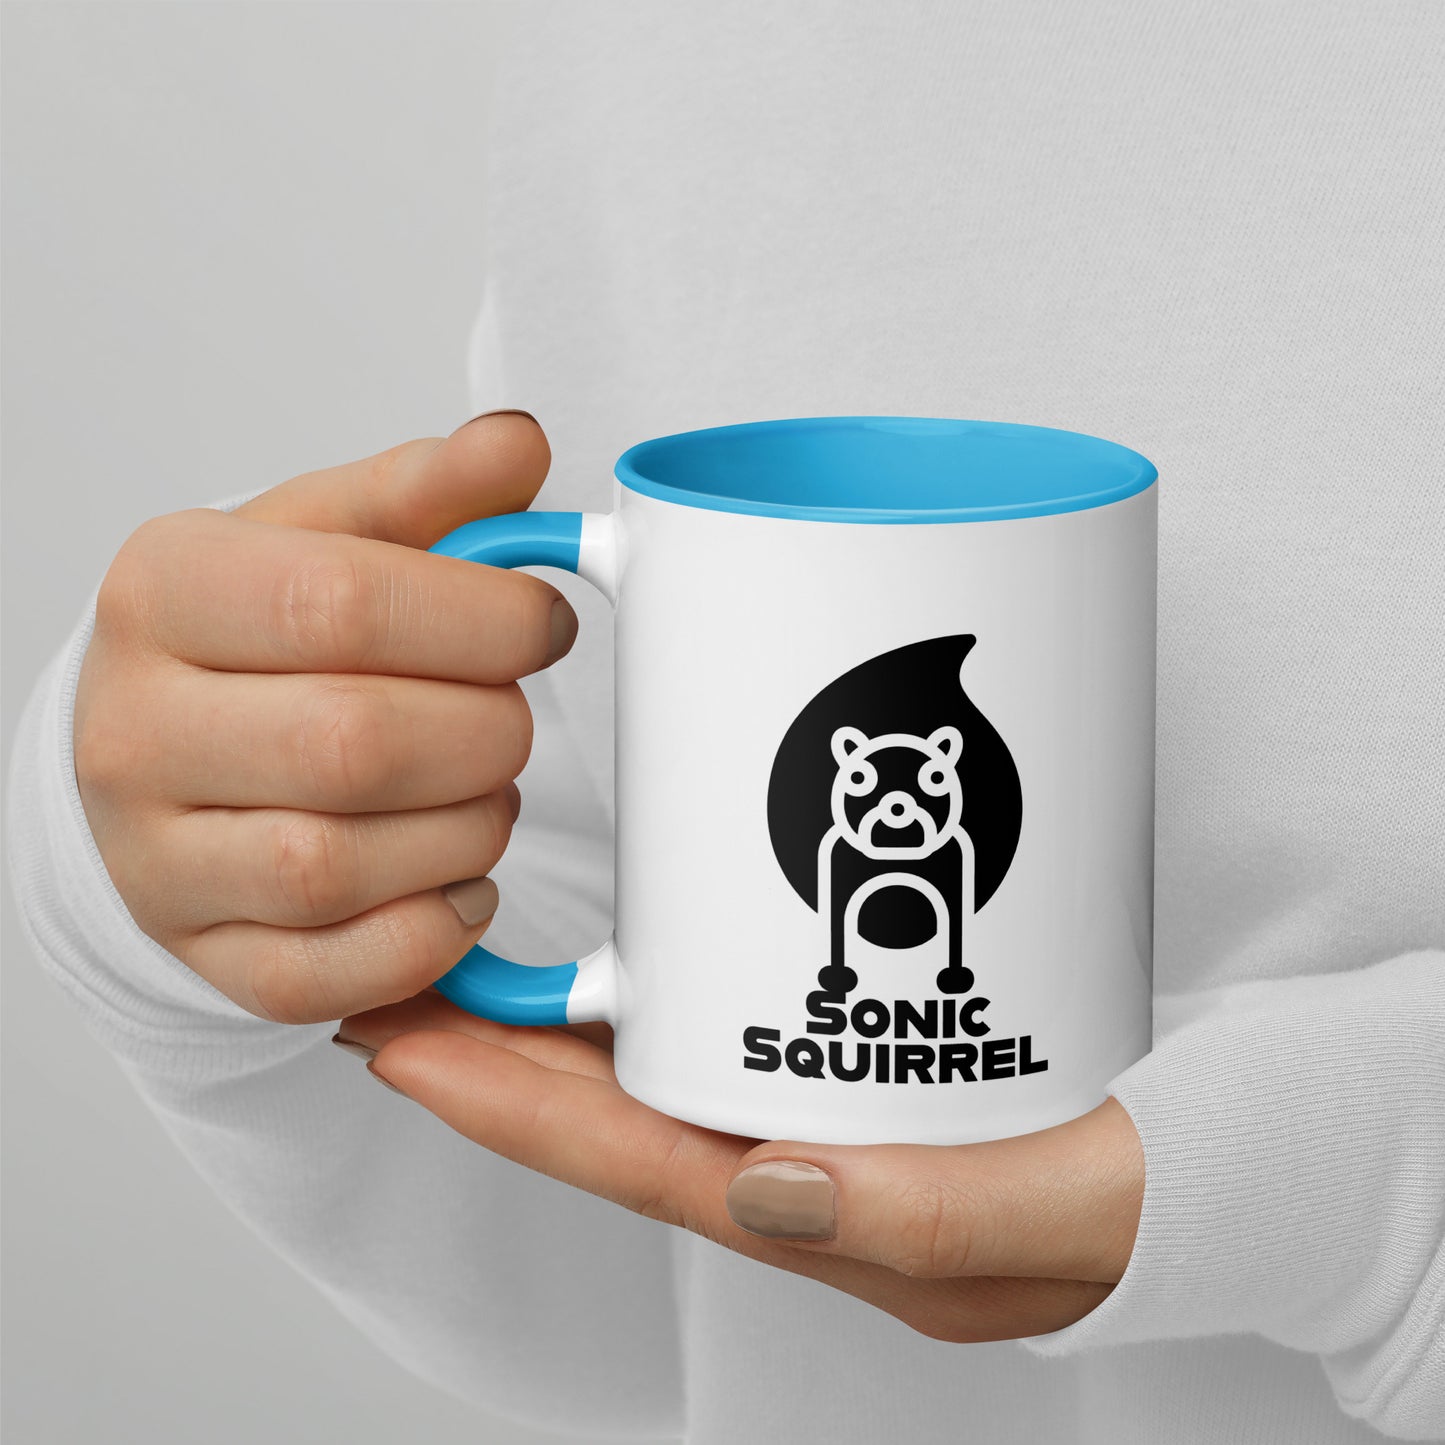 Sonic Squirrel Logo Mug With Color Inside